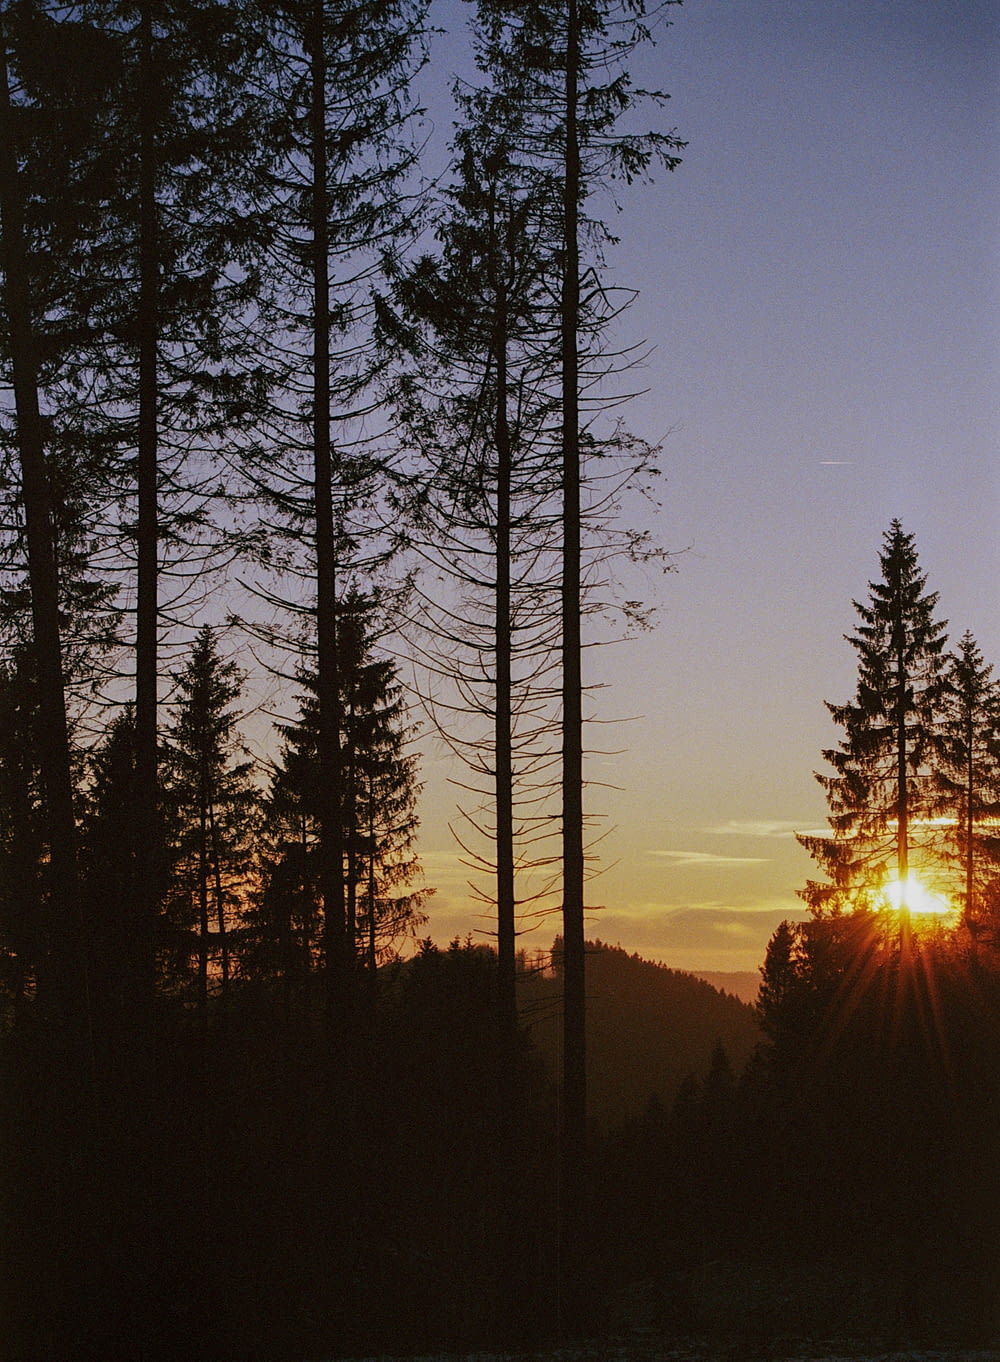 the sun is setting behind the trees in the forest